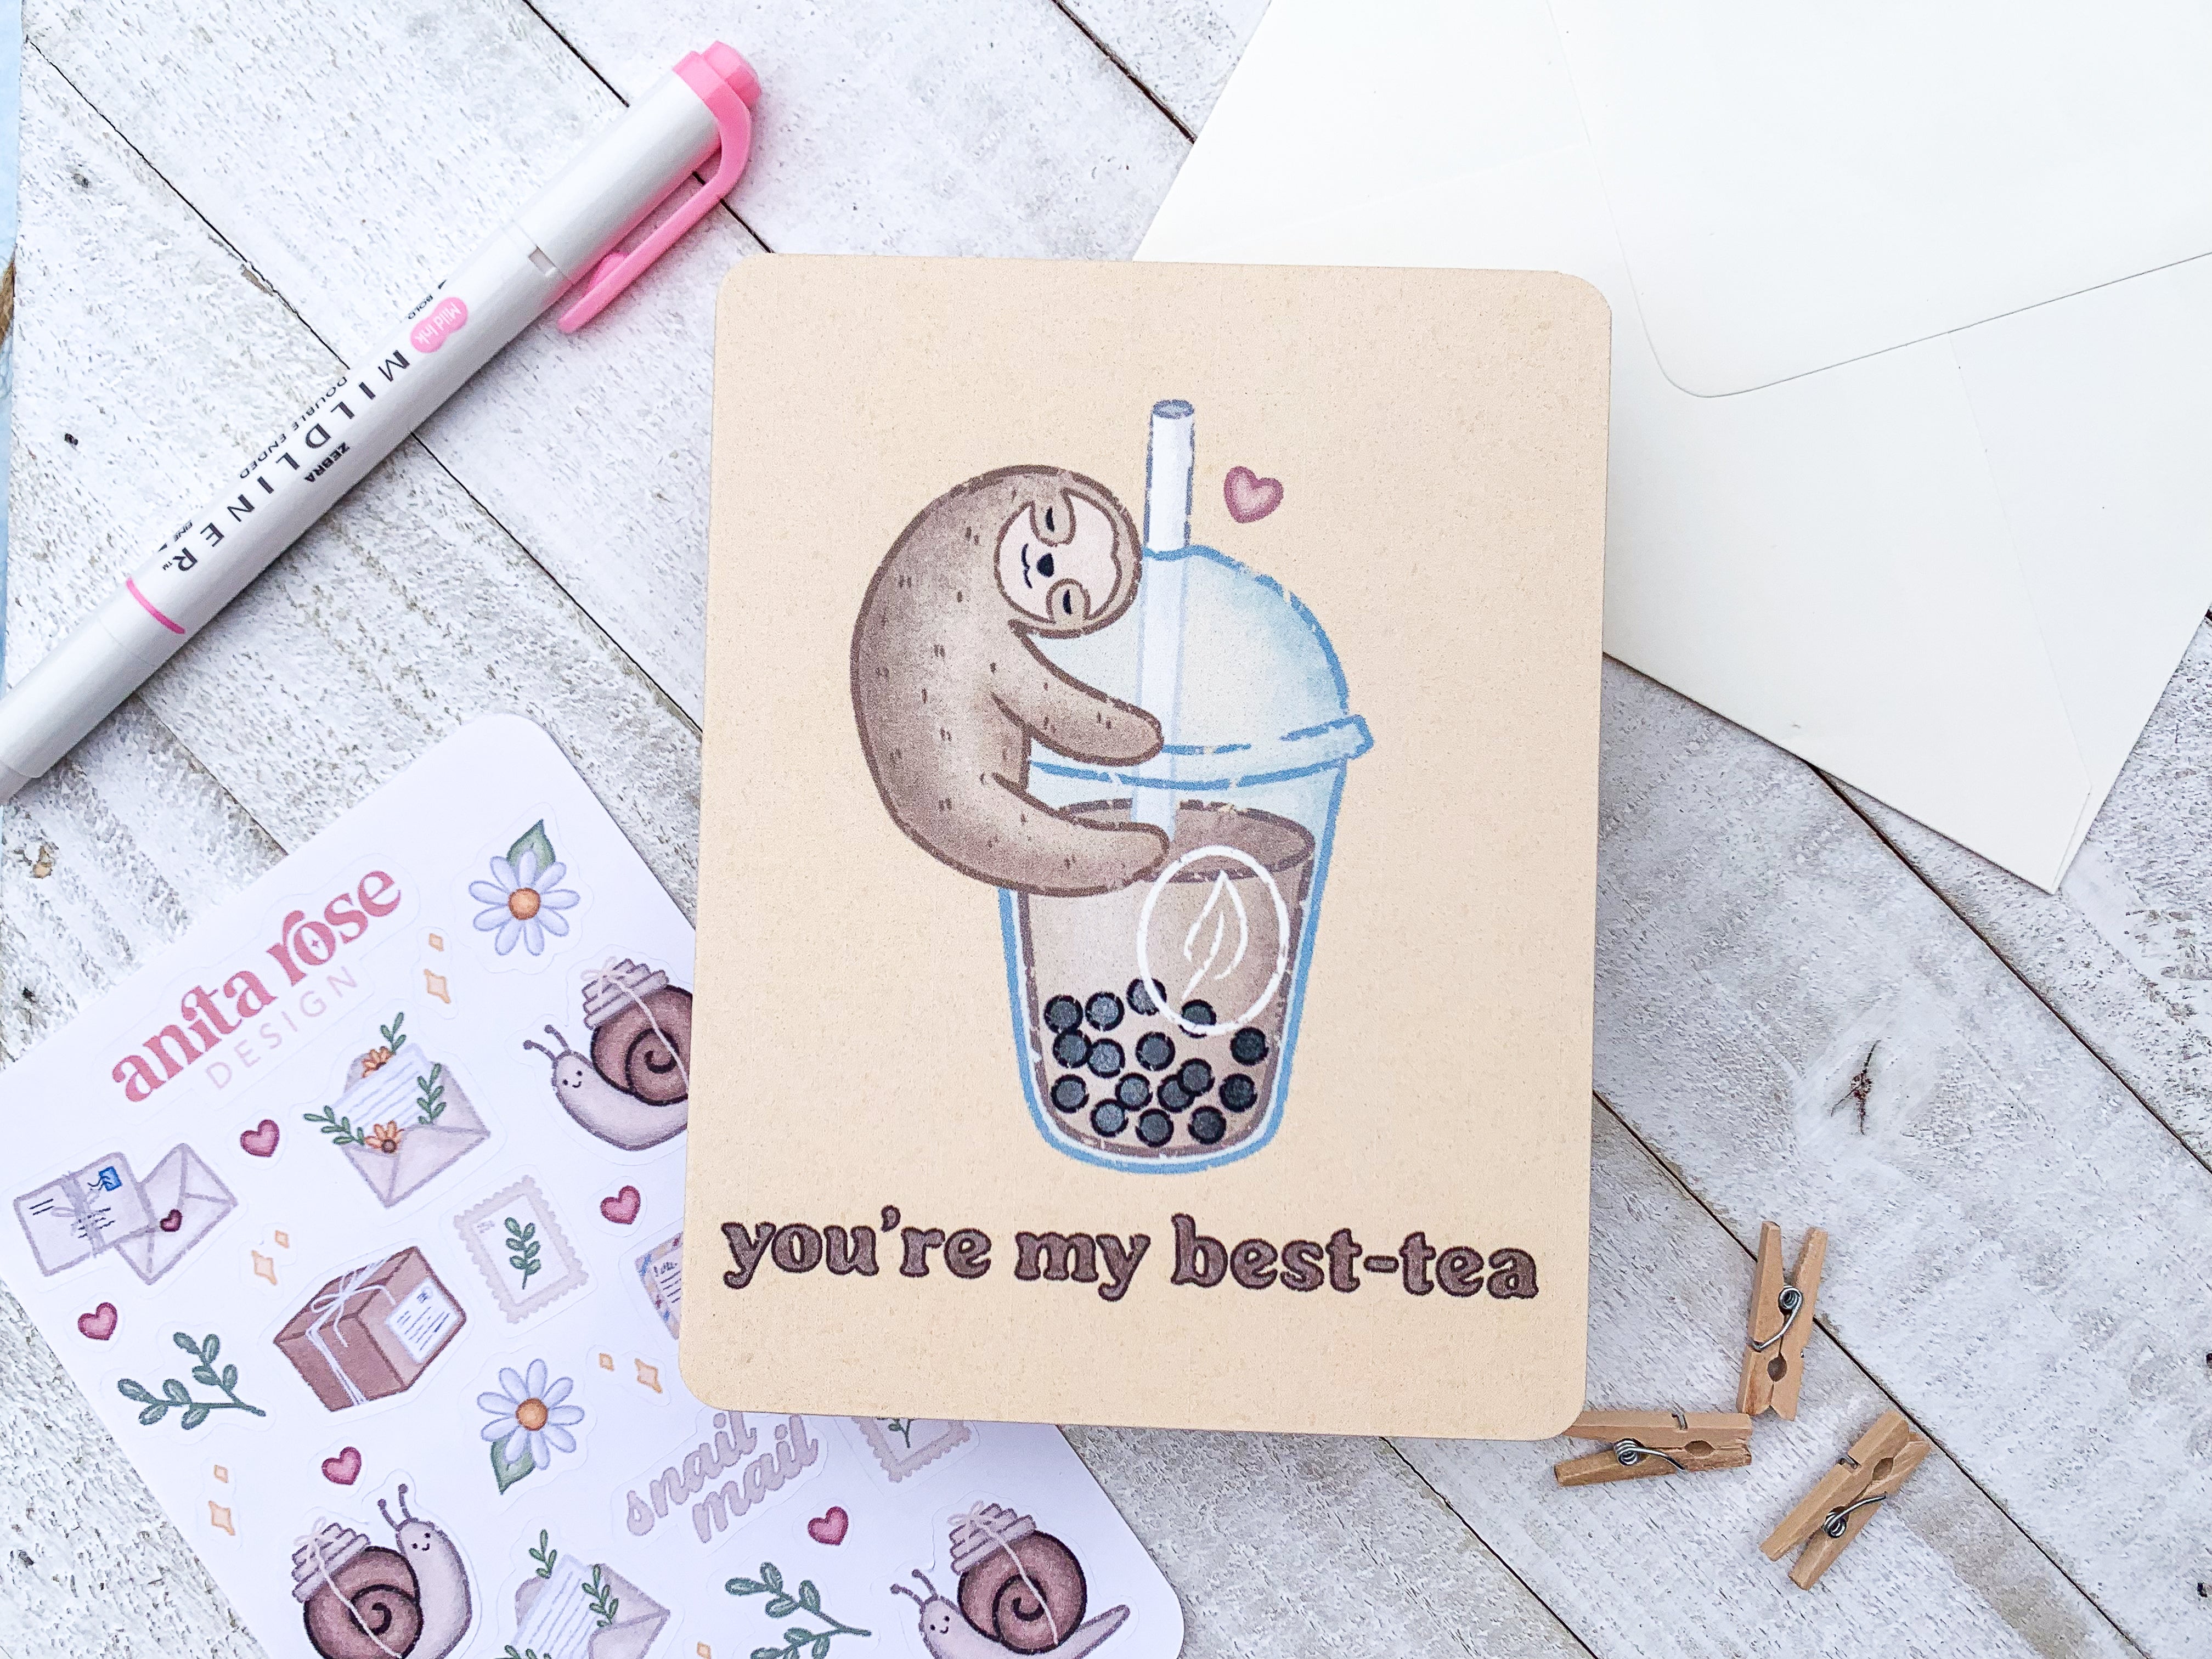 "You're My Best-Tea" Greeting Card